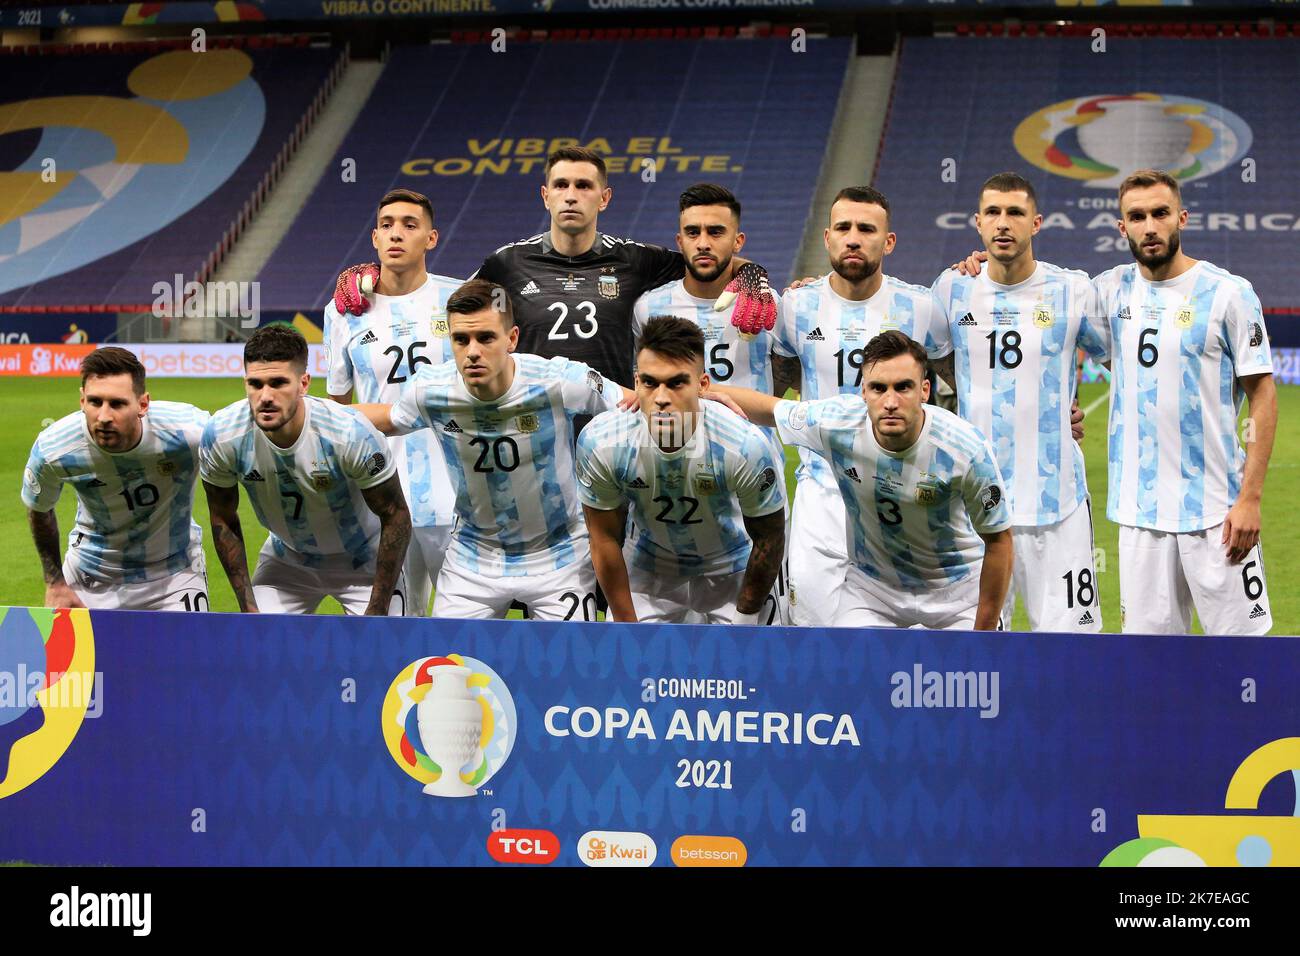 ©Laurent Lairys/MAXPPP - Team Argentina during the Copa America 2021, semi-final football match between Argentina and Colombia on July 6, 2021 at Estádio Nacional Mané Garrincha in Brasilia, Brazil photos Laurent Lairys /MAXPPP Stock Photo